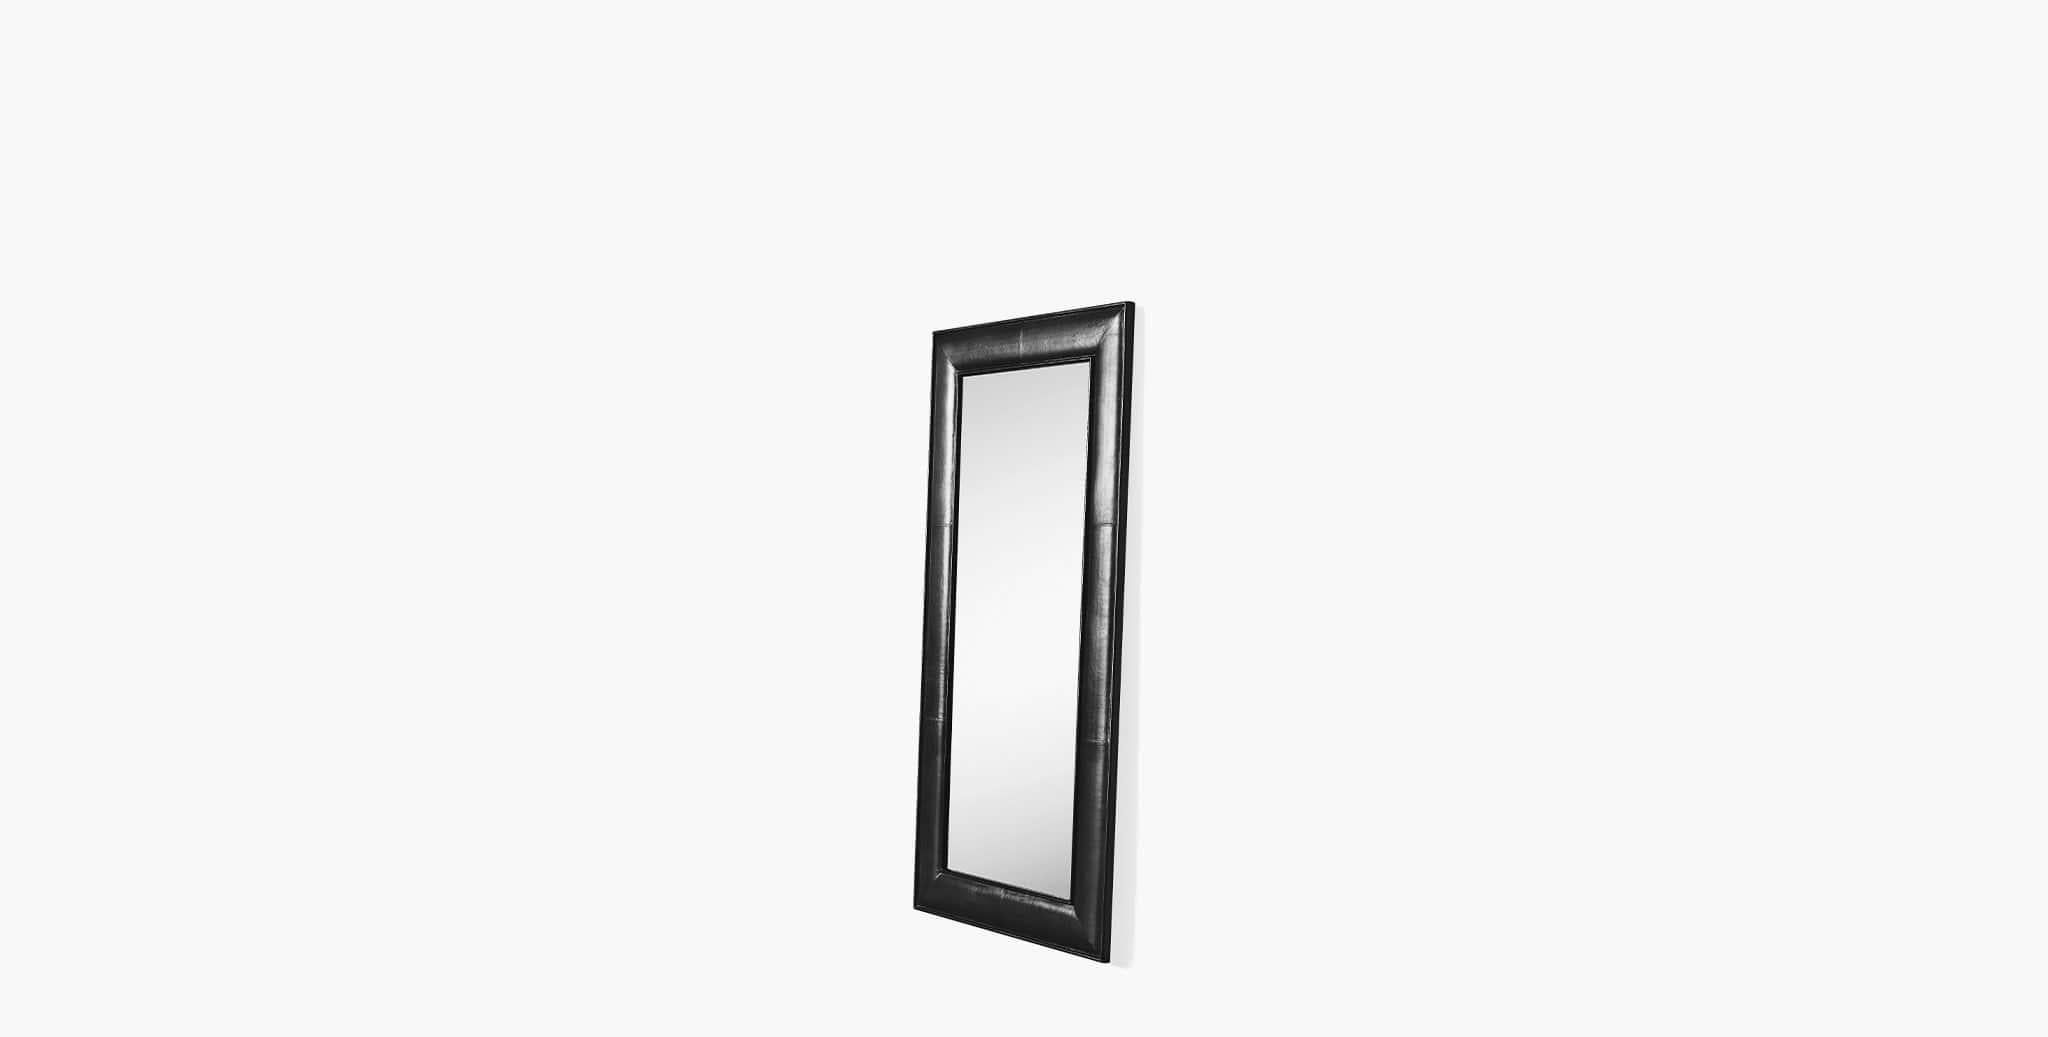 Our Clove Leather Wall Mirror is wrapped in genuine Italian leather, providing an element of luxury and warmth. Our handcrafted leathers and finishes are inspired by the natural variations within fibers, textures, and weaves. Each selection is